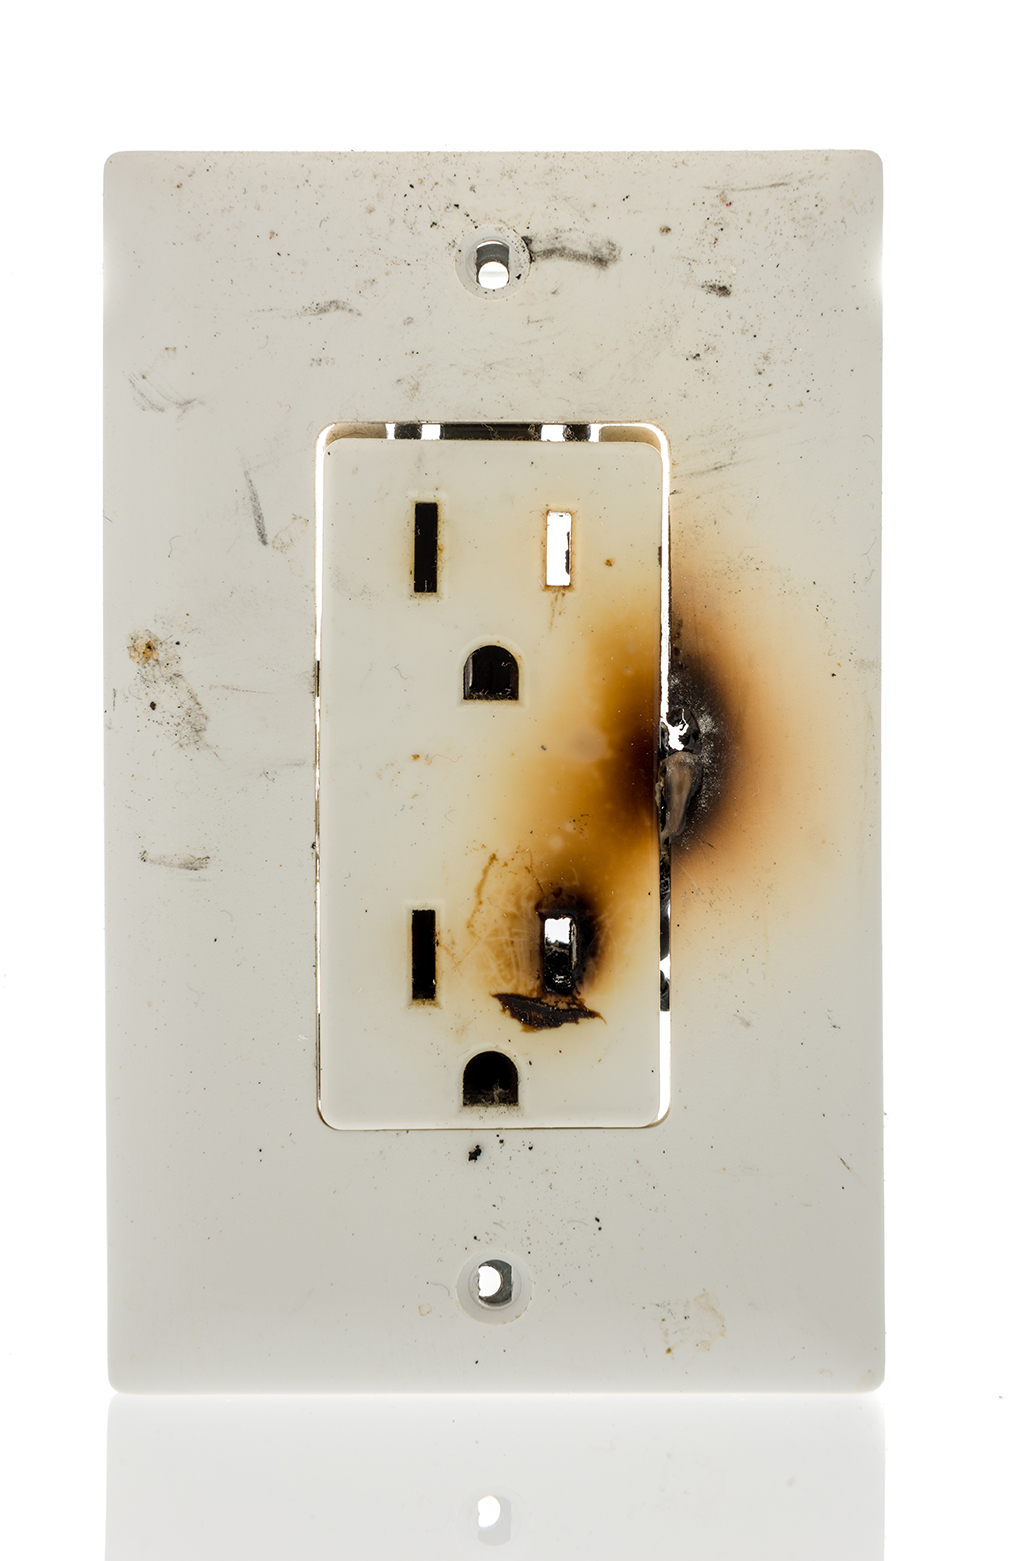 Common Household Electrical Issues That You Need An Emergency Electrician To Fix | Wilmington, NC